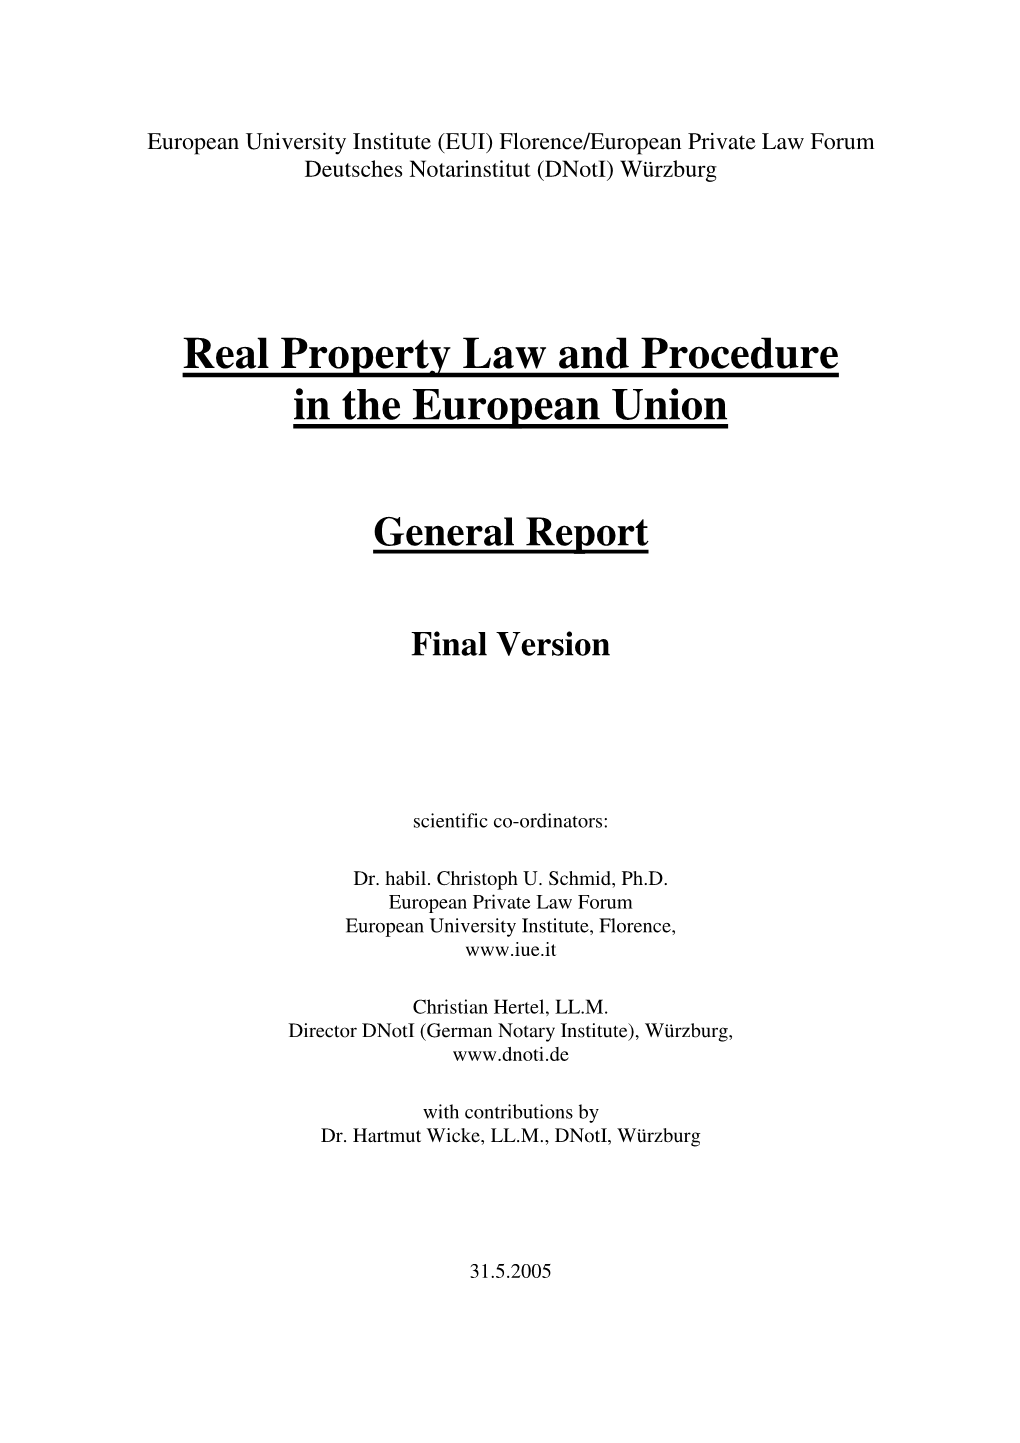 Real Property Law and Procedure in the European Union